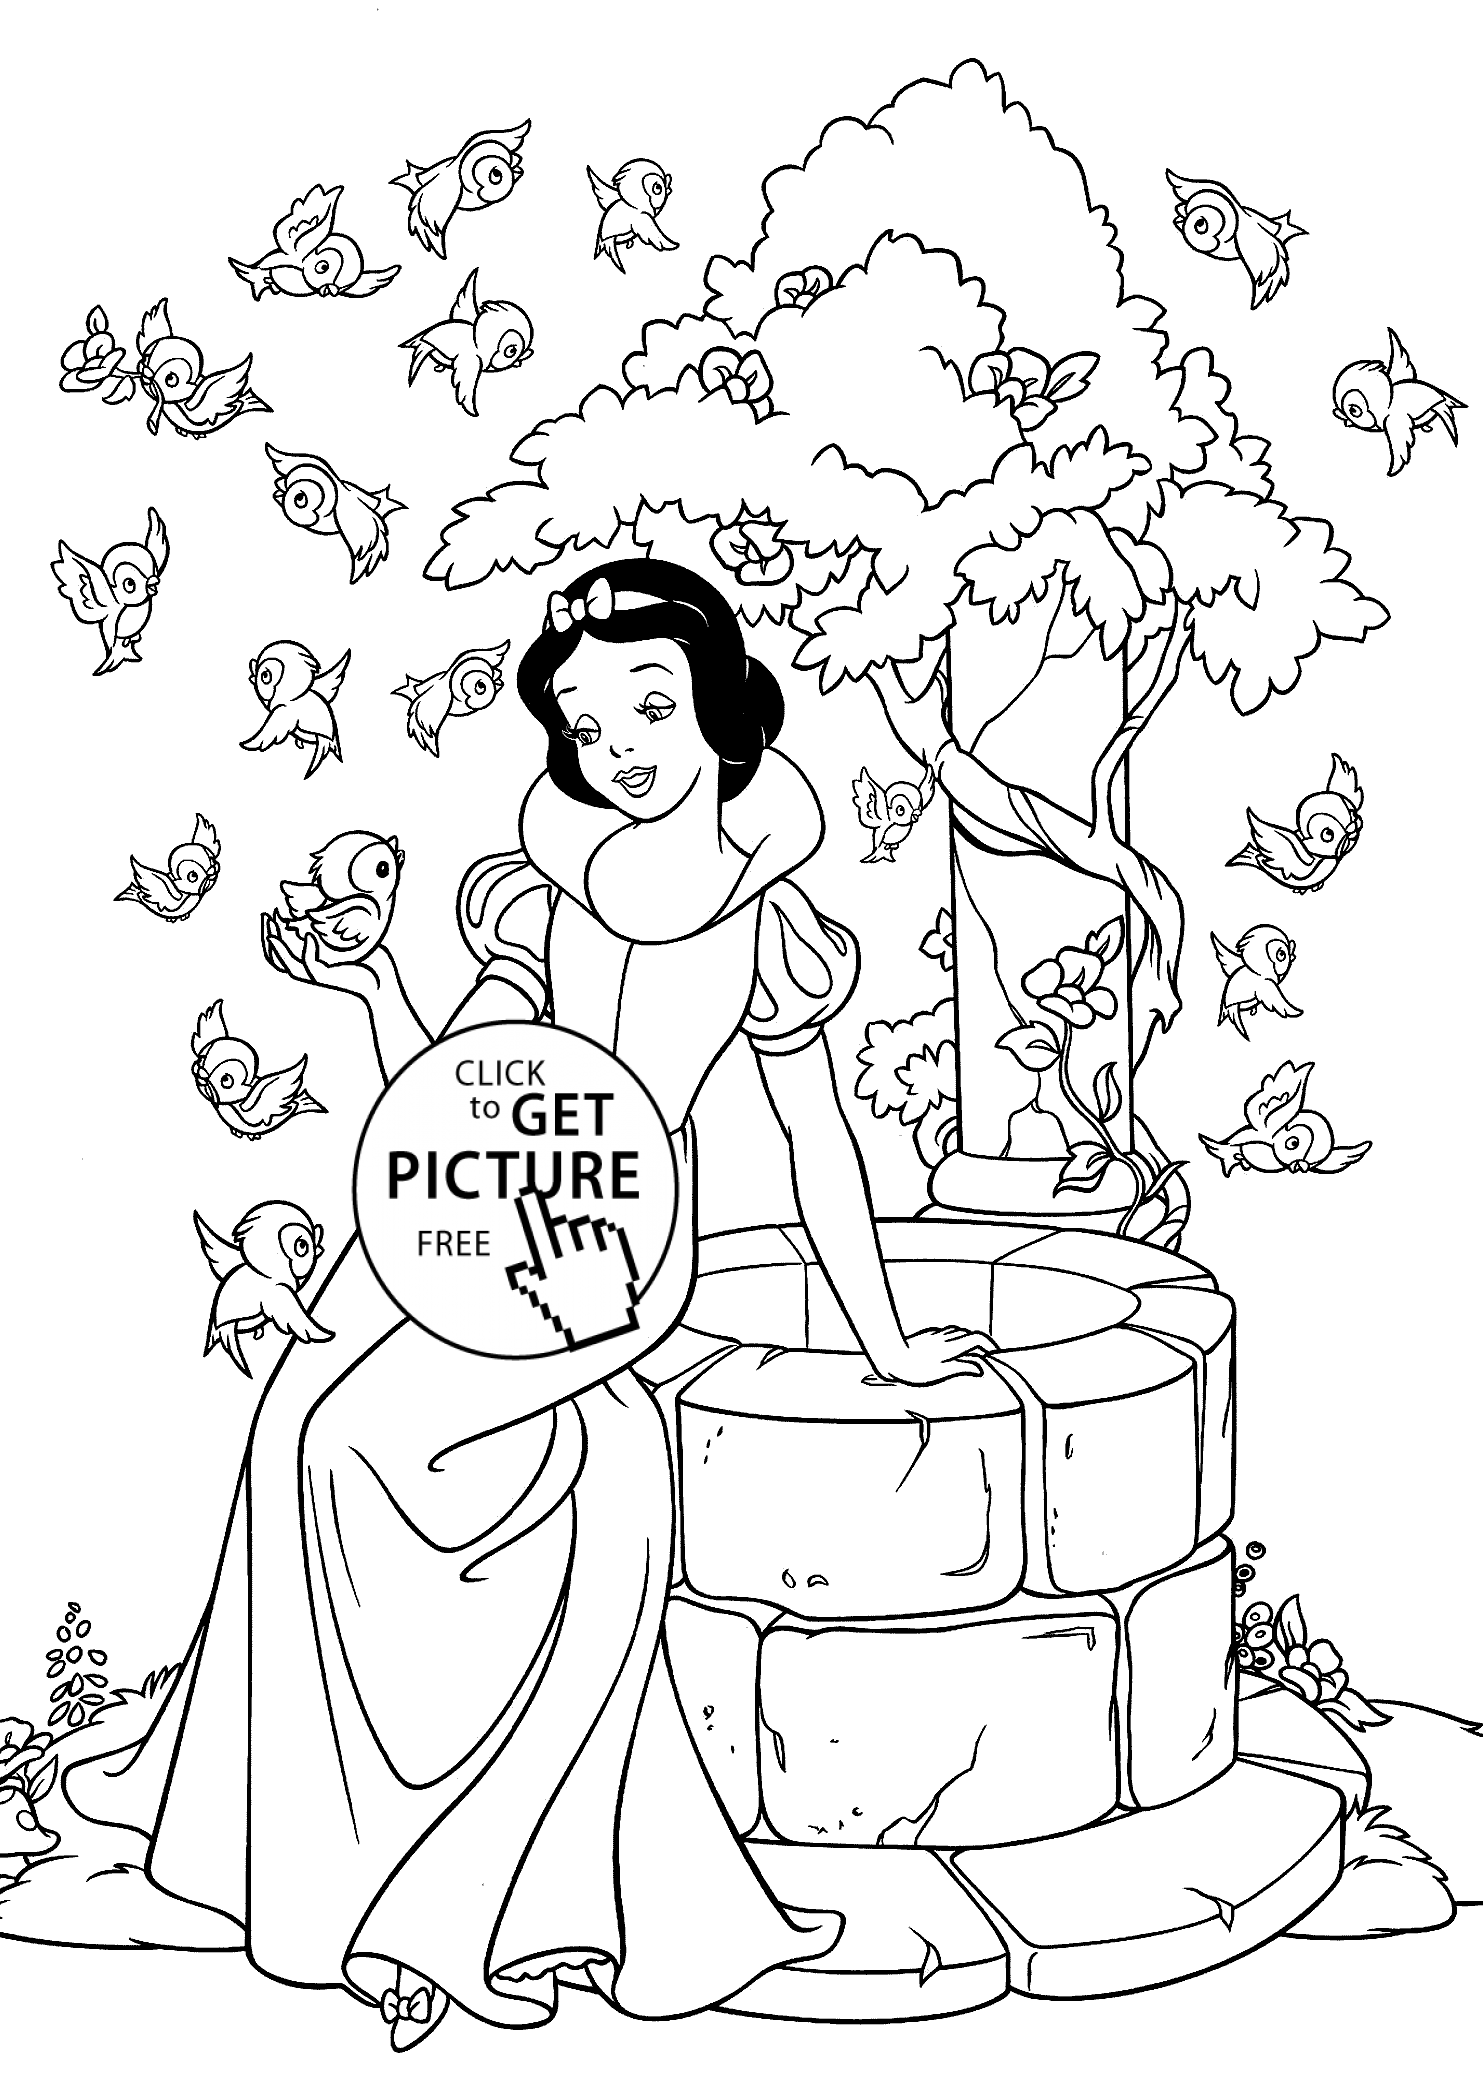 Princess Snow White coloring pages for kids, printable free